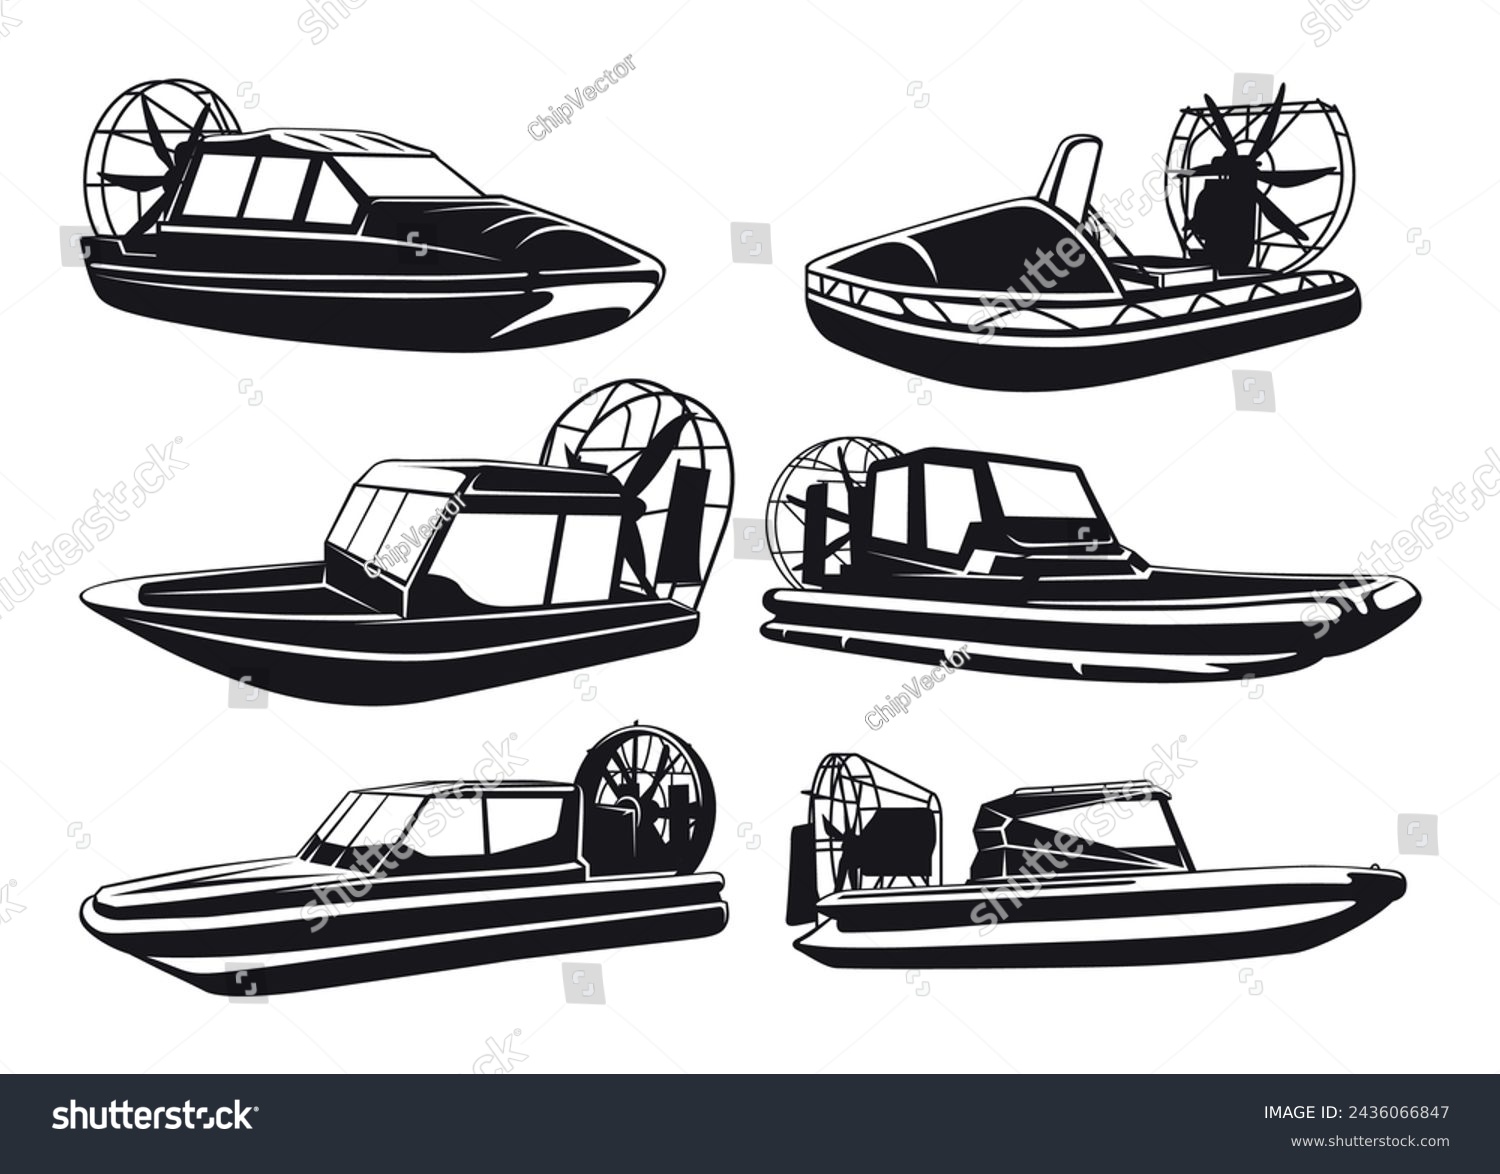 SVG of Airboat icon marine travel passenger speed transportation with propeller black monochrome set isometric vector illustration. Ship boat nautical vessel for sea river ocean water pond movement floating svg